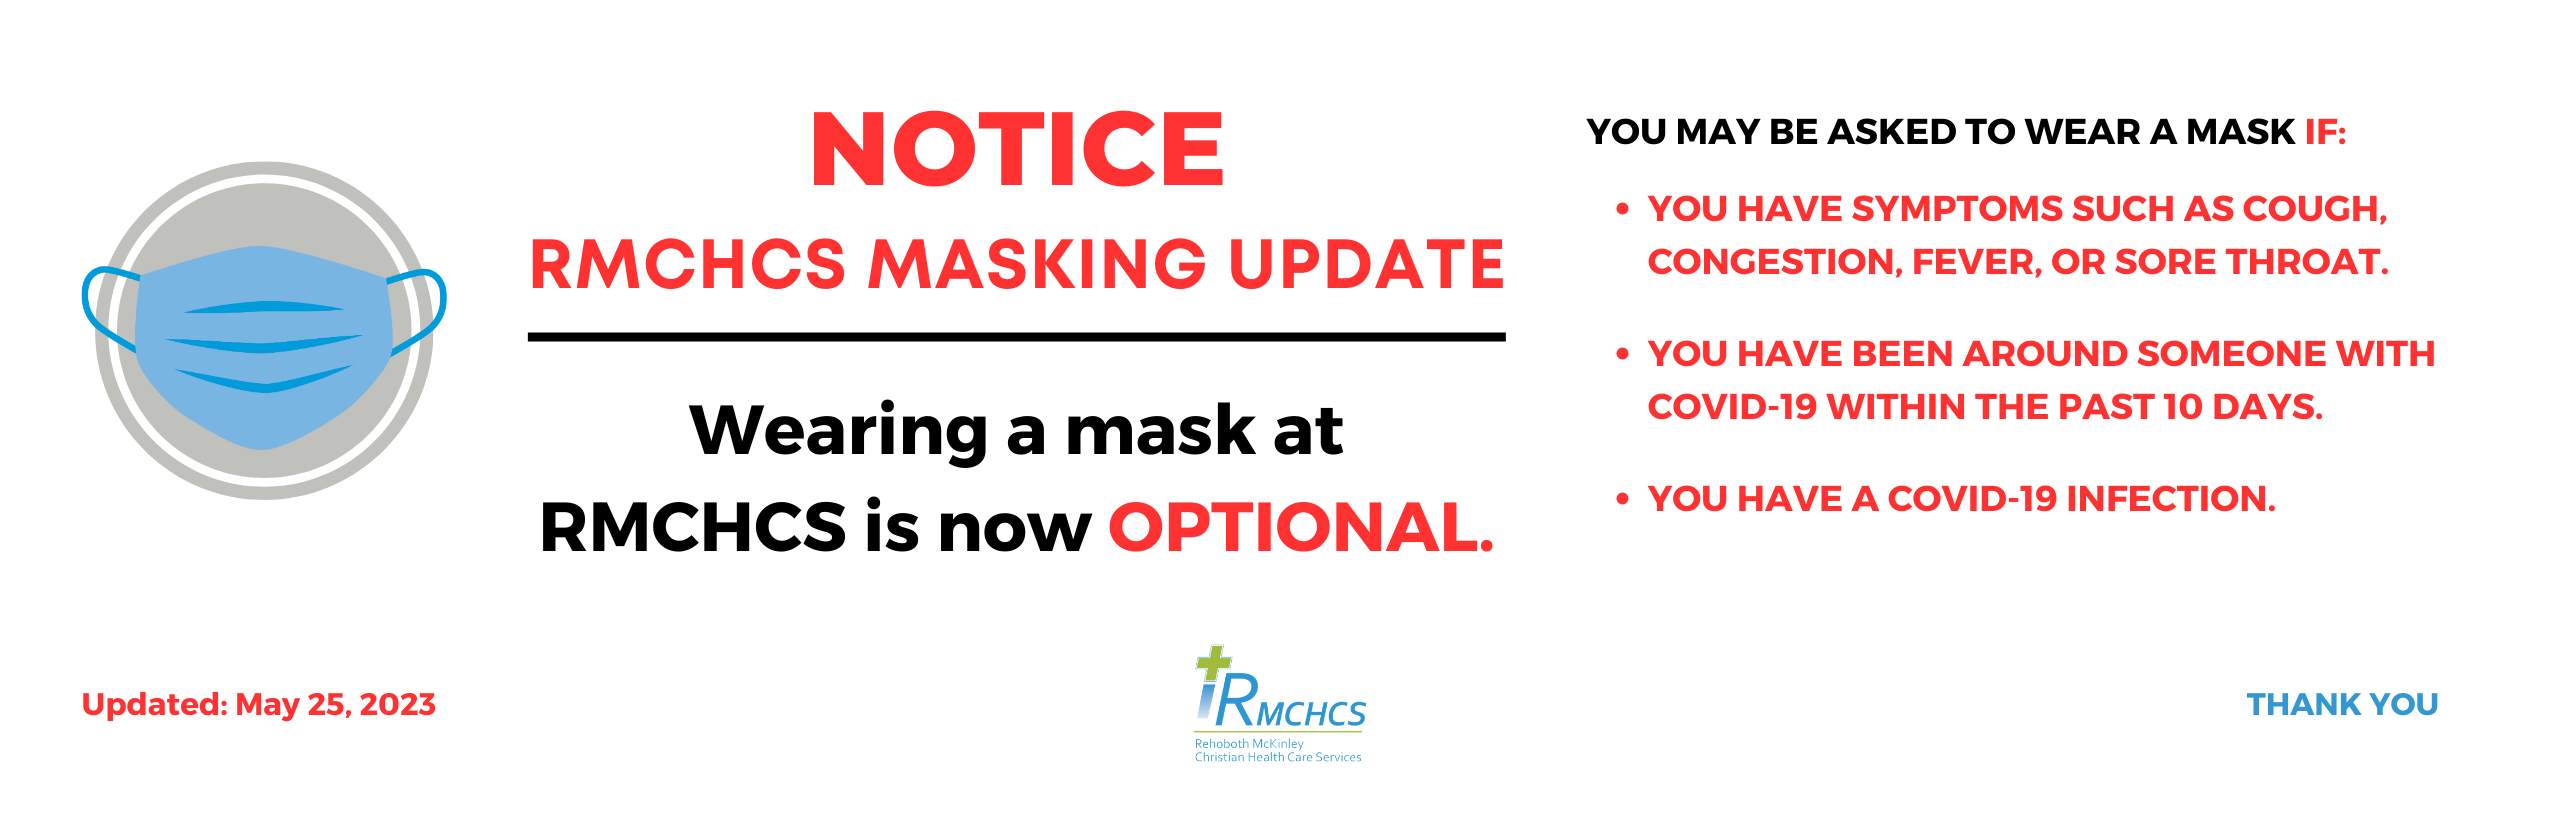 RMCHCS Notice. Masks at RMCHCS is now optional.